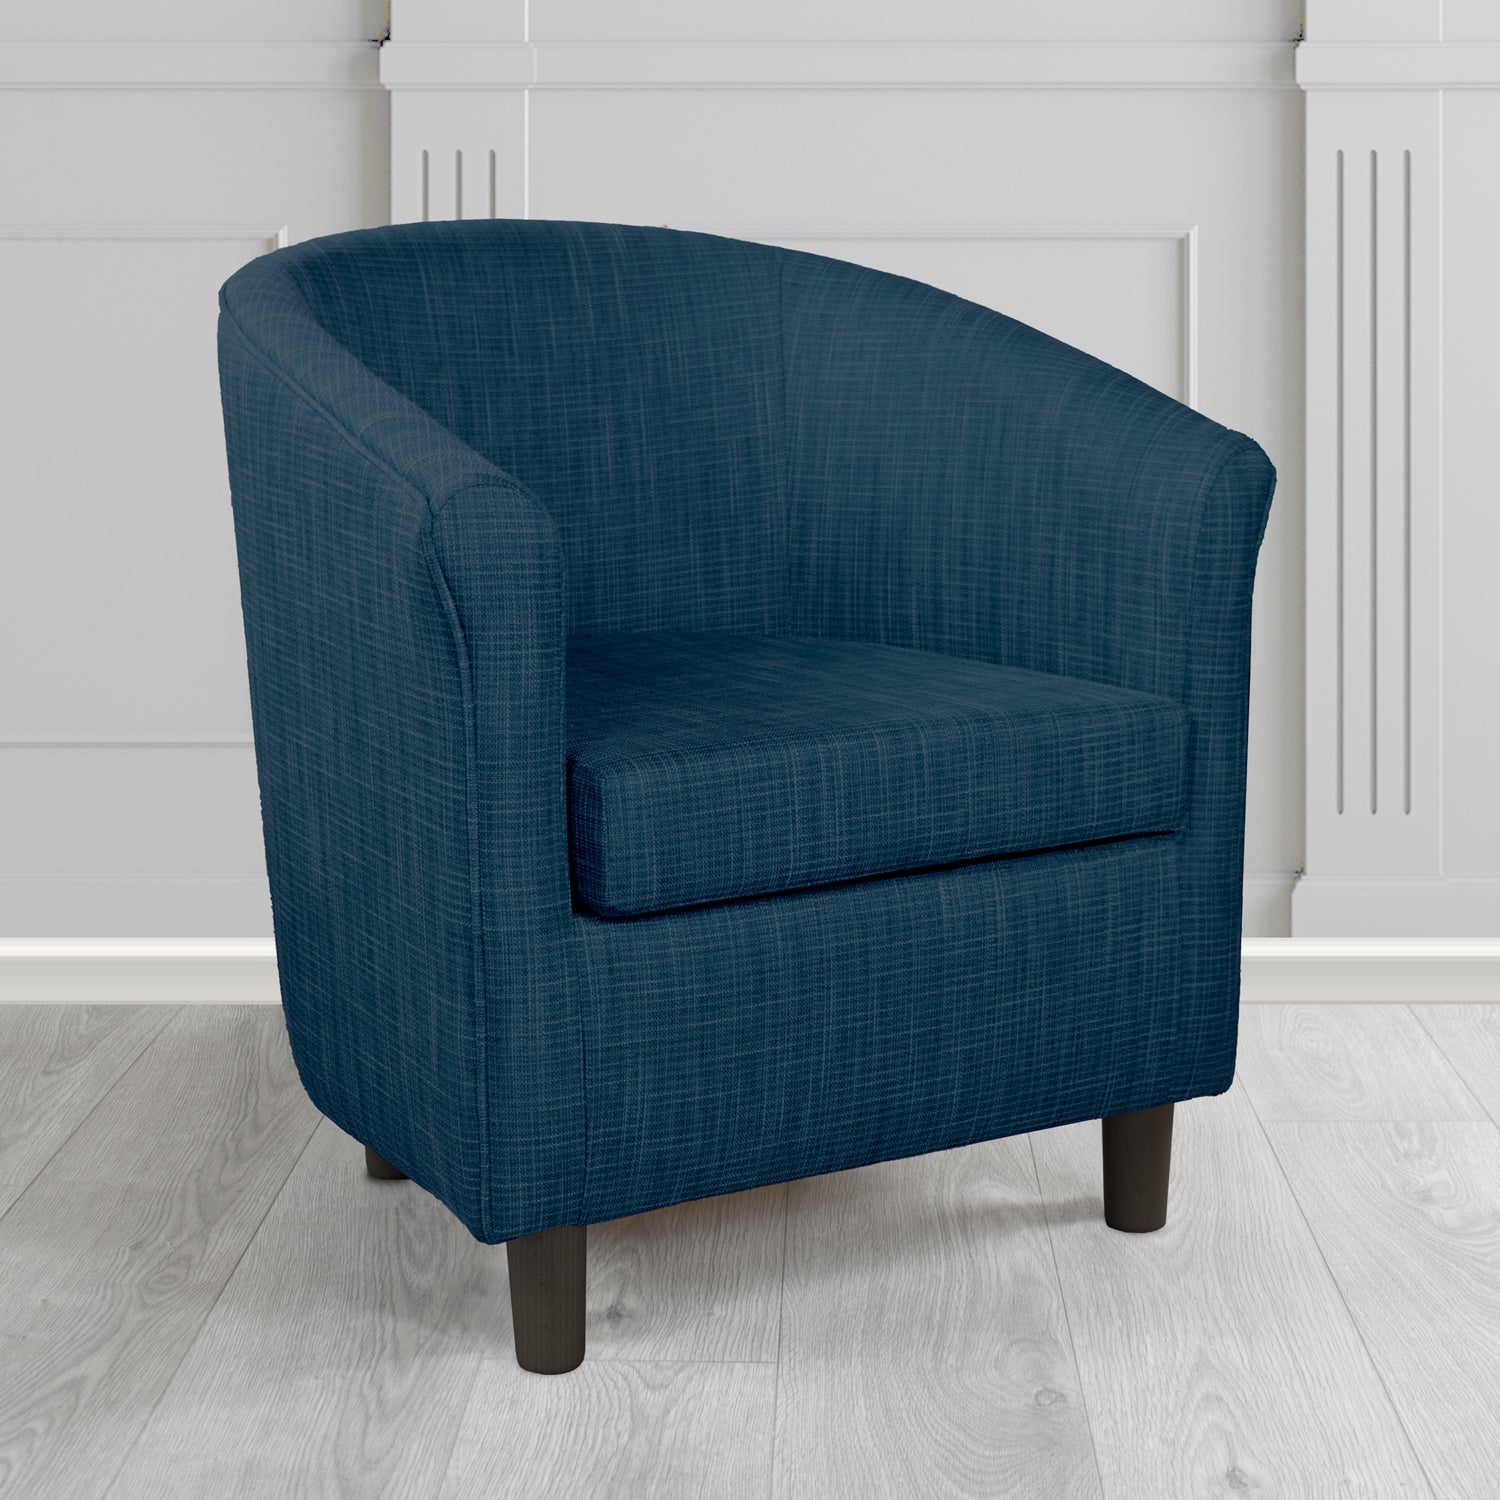 Tuscany Ravel Prussian Blue Contract Crib 5 Fabric Tub Chair - Antimicrobial & Water-Resistant - The Tub Chair Shop